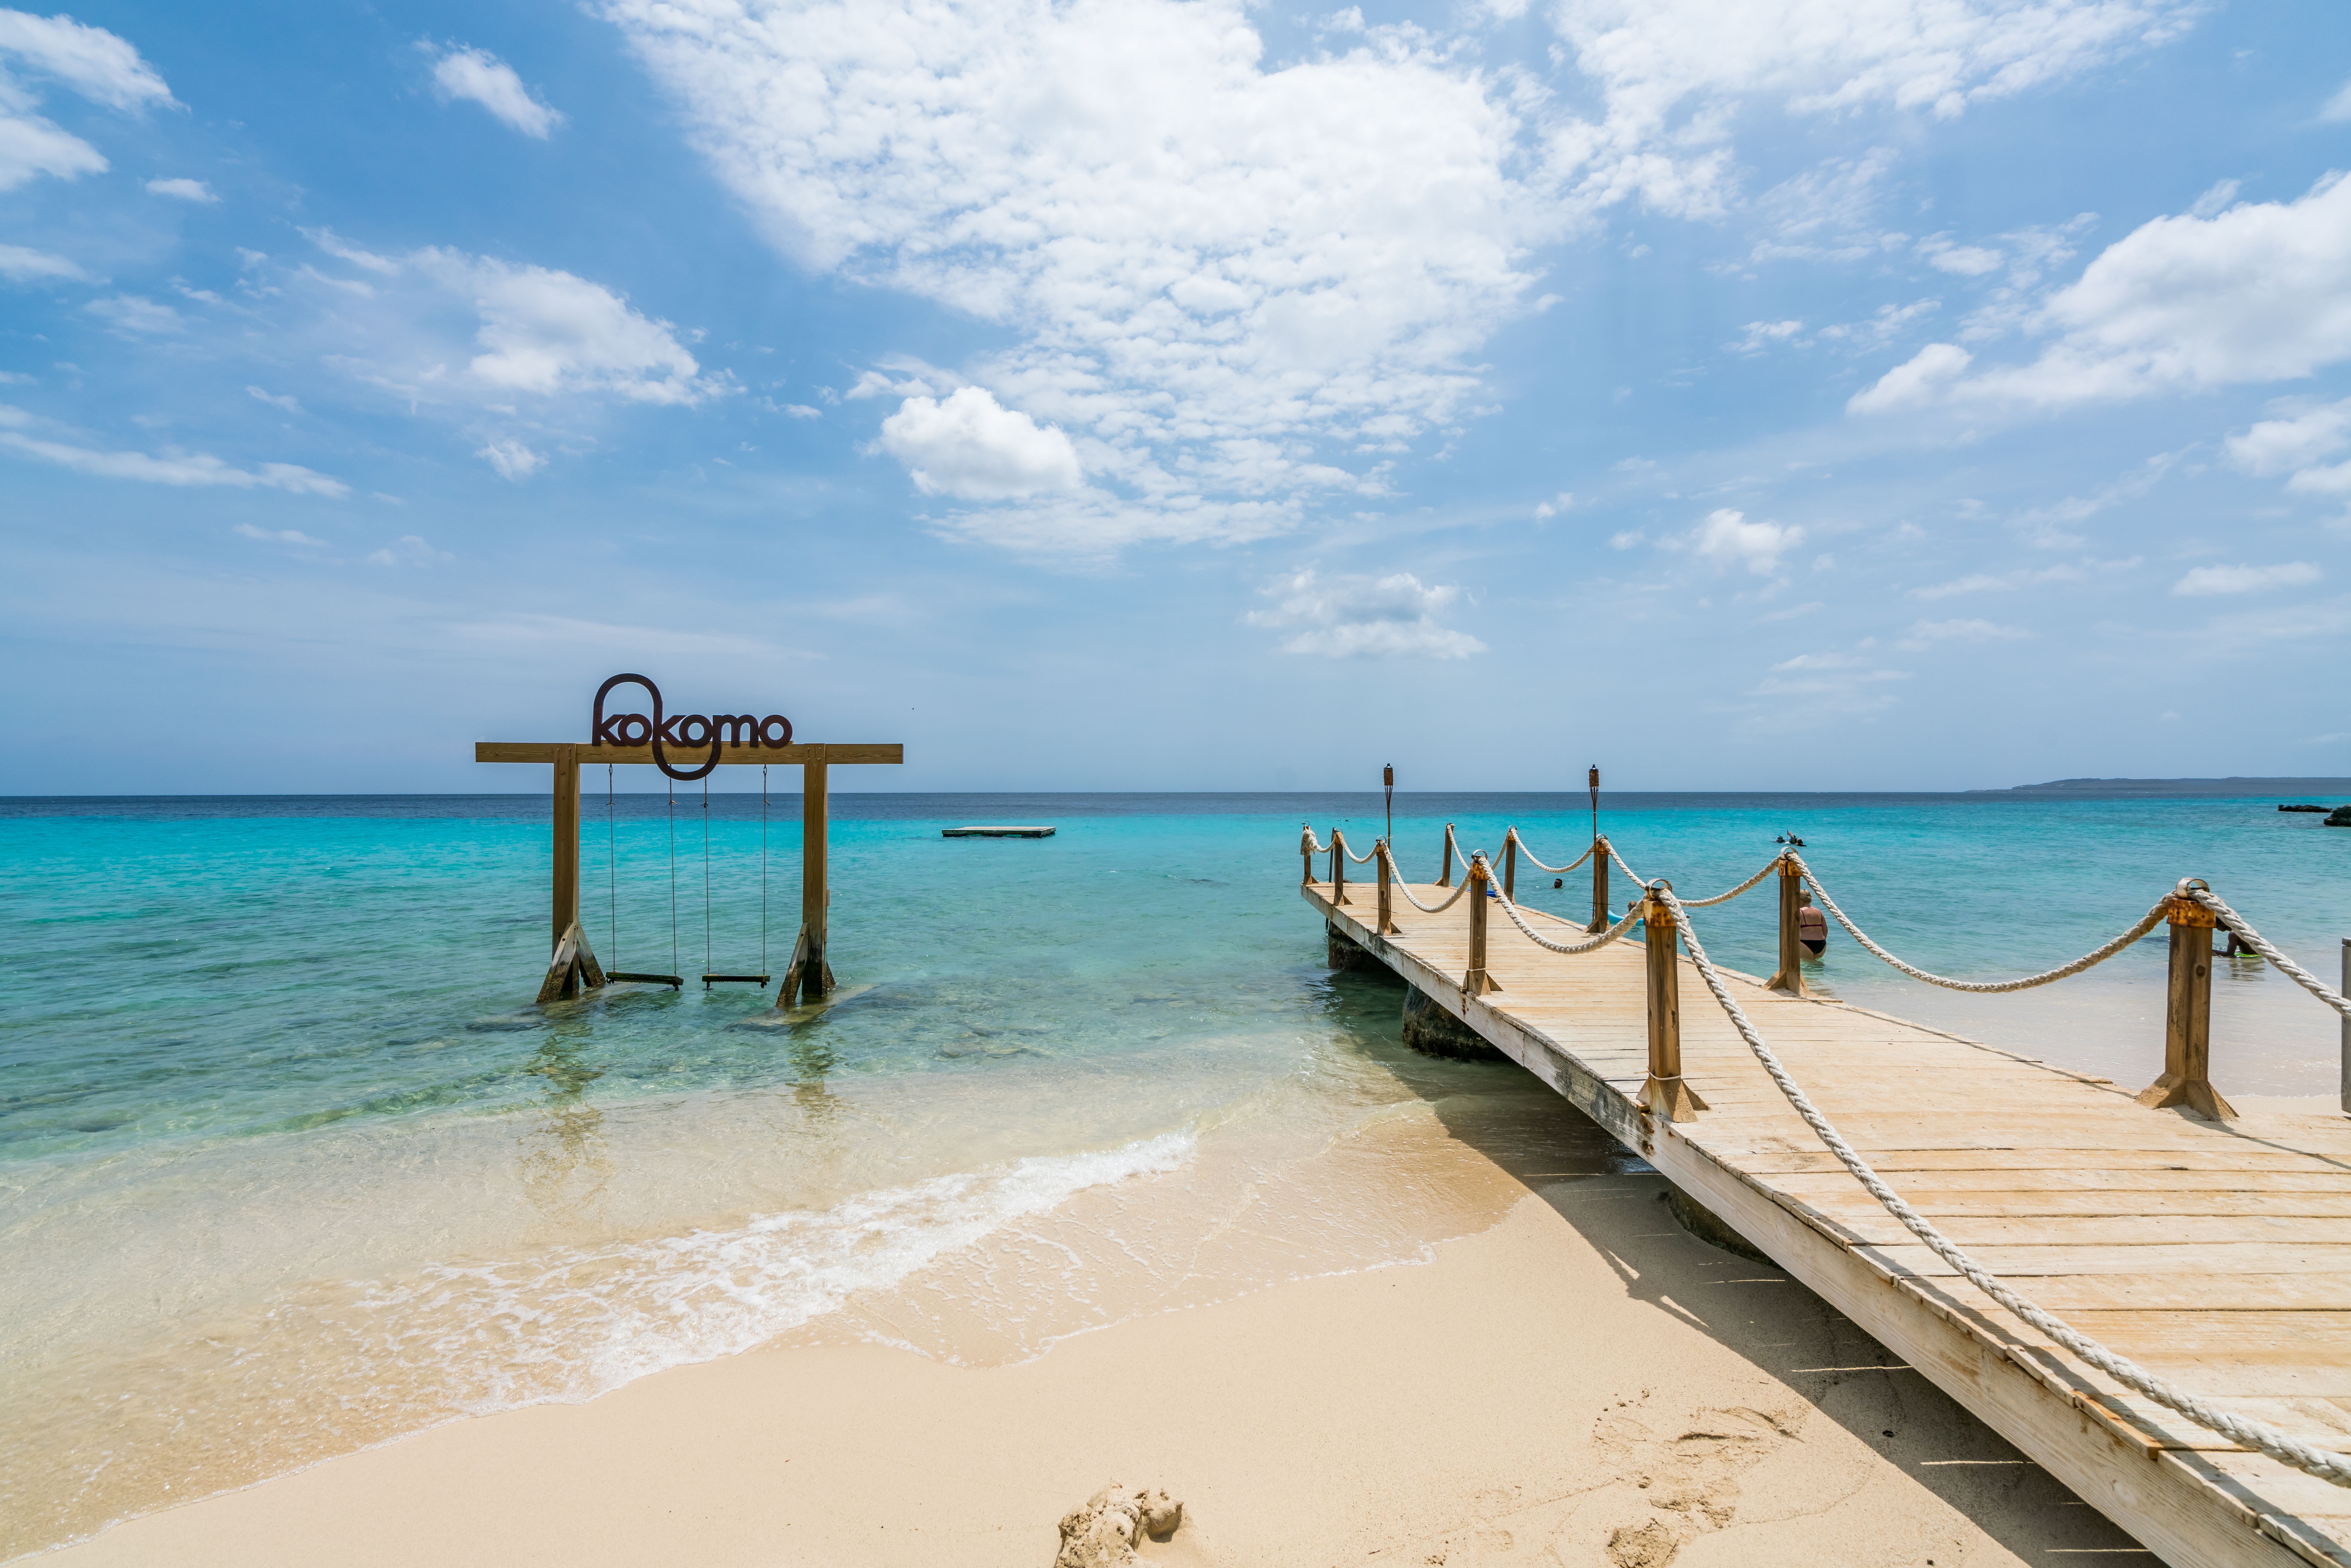 Serene view of Kokomo Beach in Curacao with a wooden pier and rope swings under a sign, white sandy shore, and crystal-clear turquoise waters.